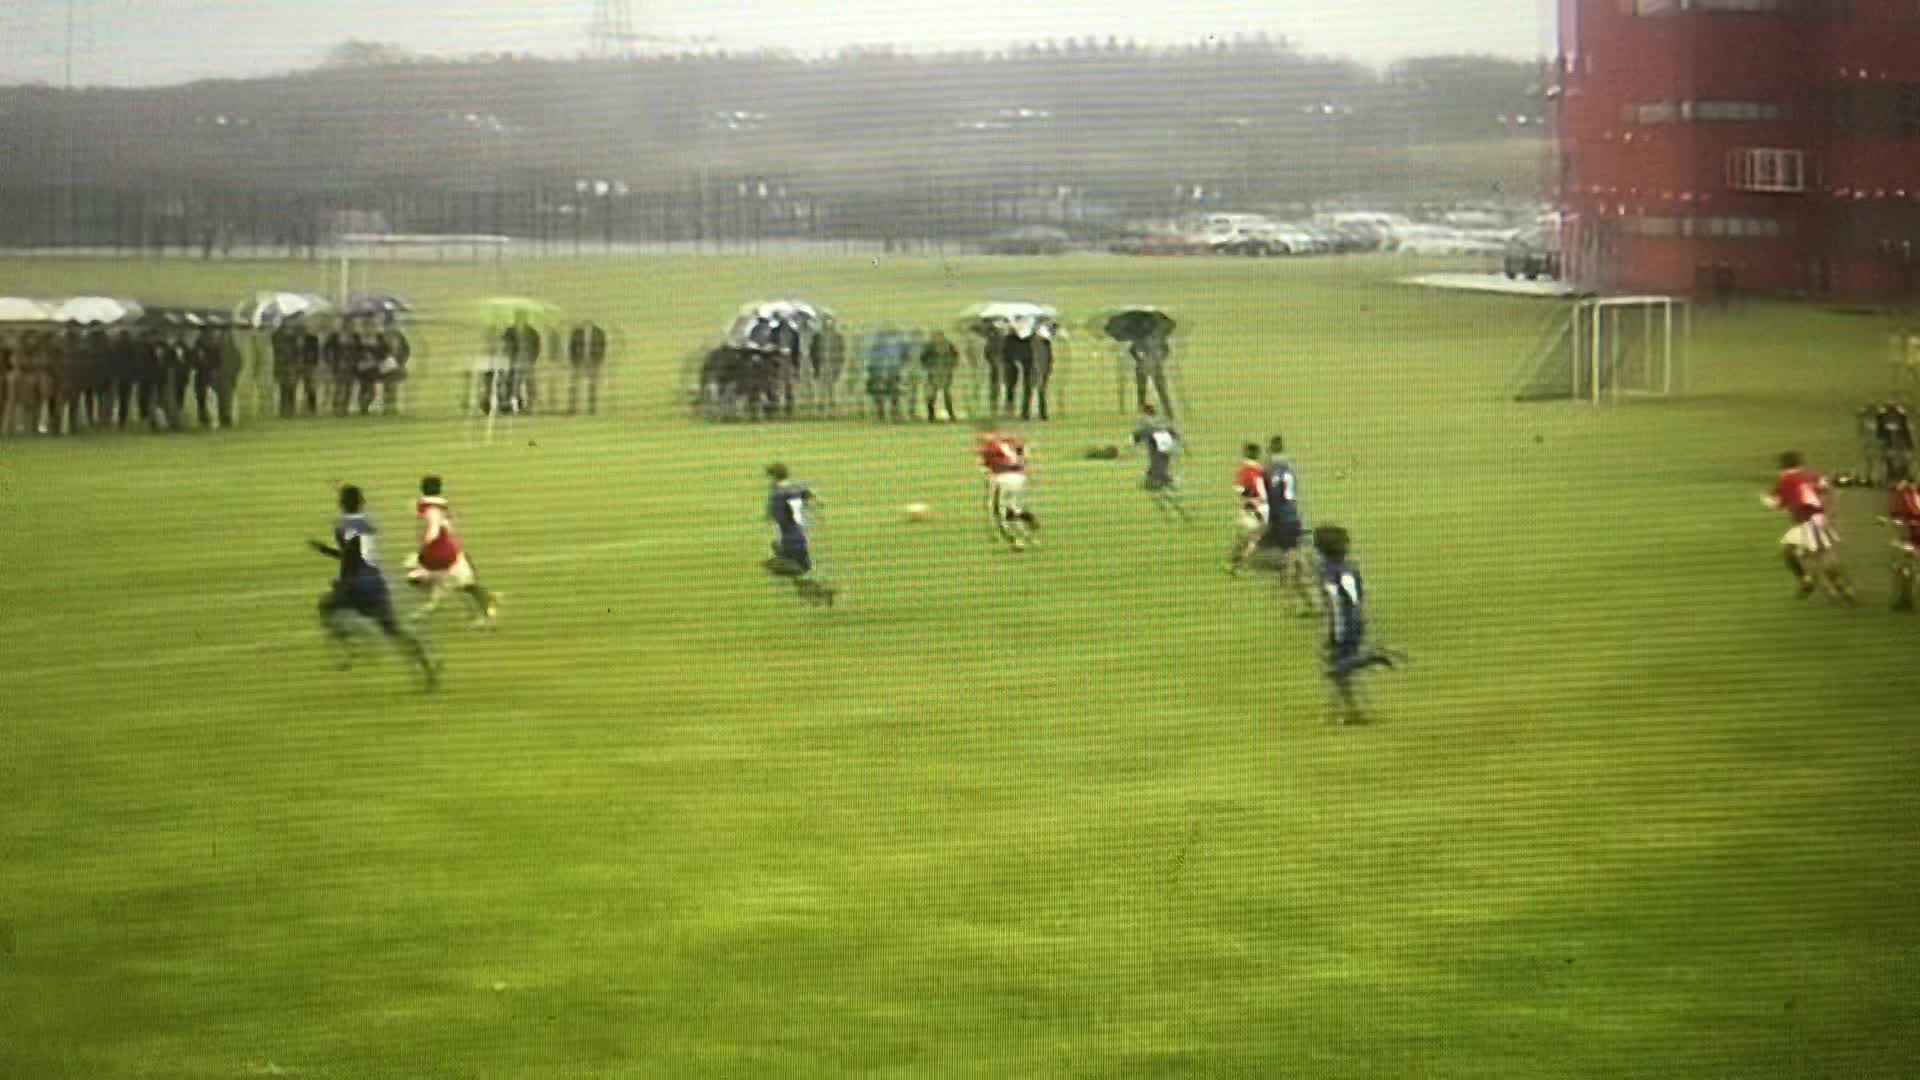 12 Year Old Brandon Wust Scoring against Wals